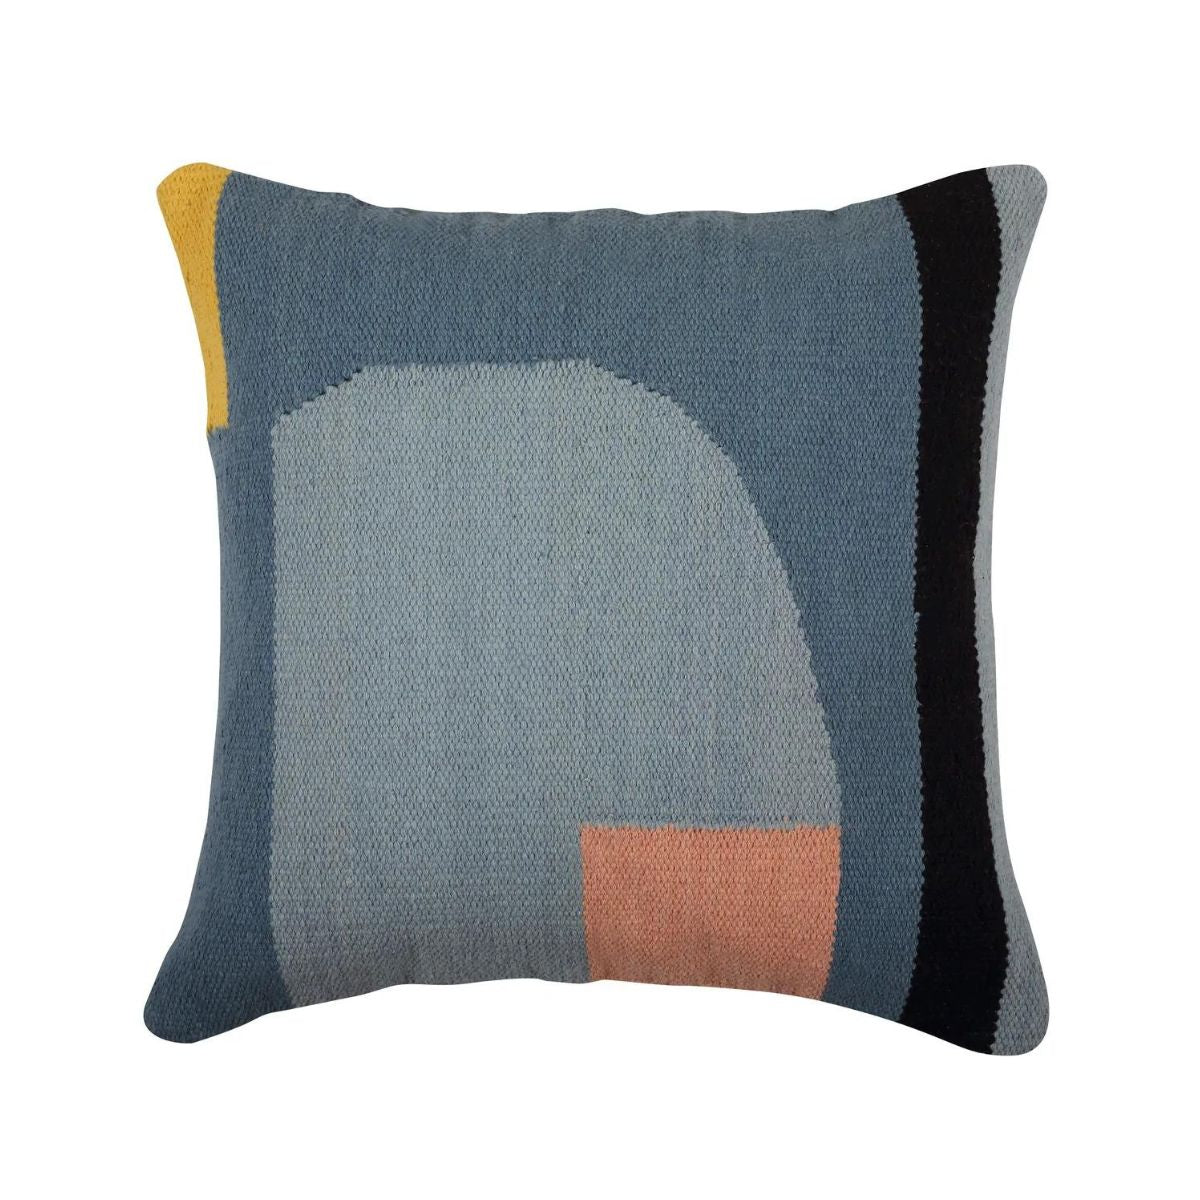 Geo Shapes Cotton Hand Loomed Square Pillow